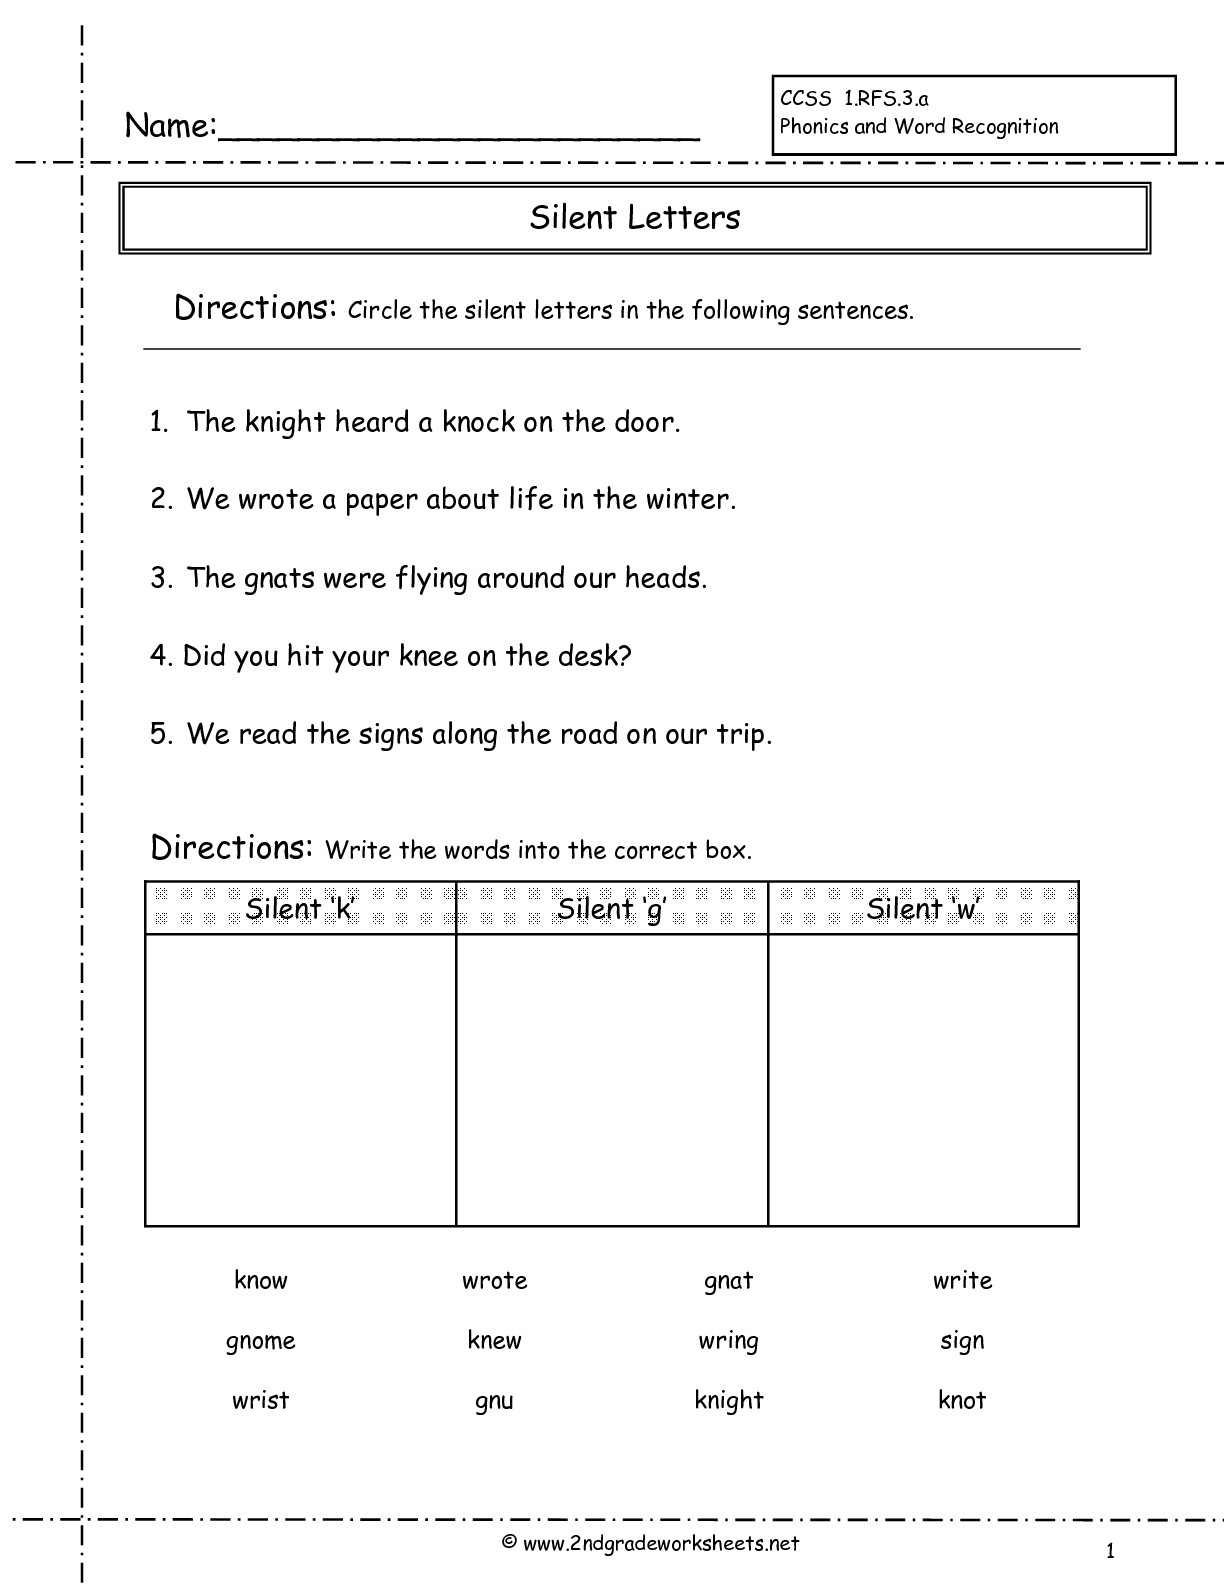 Second Grade Phonics Worksheets And Flashcards - Free Printable Grade 1 Phonics Worksheets